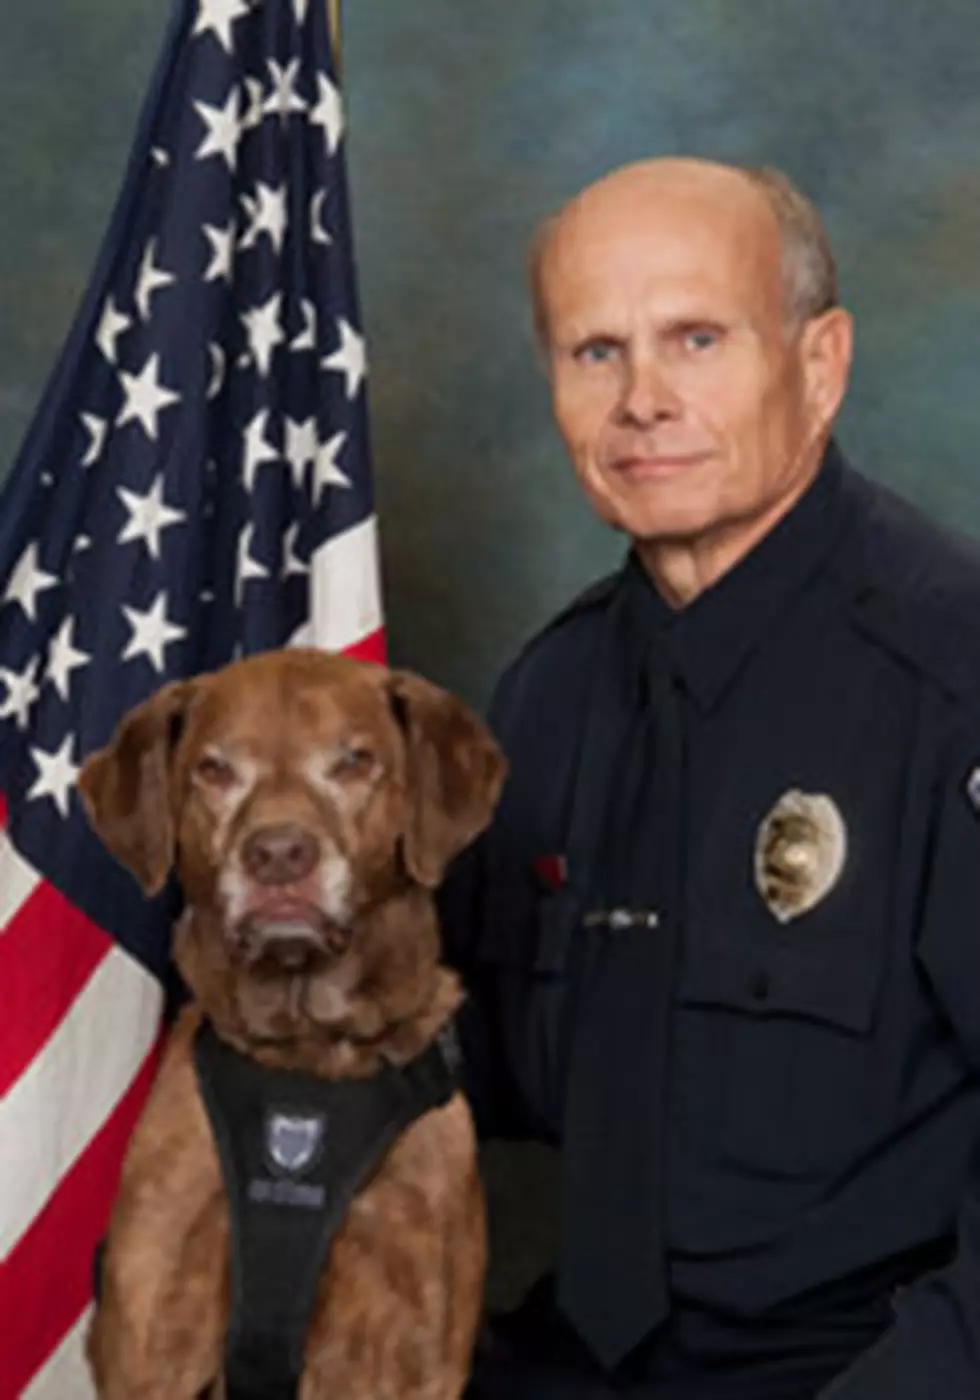 Police Chief Injured, Dog Dies After Vehicle Rear-Ended